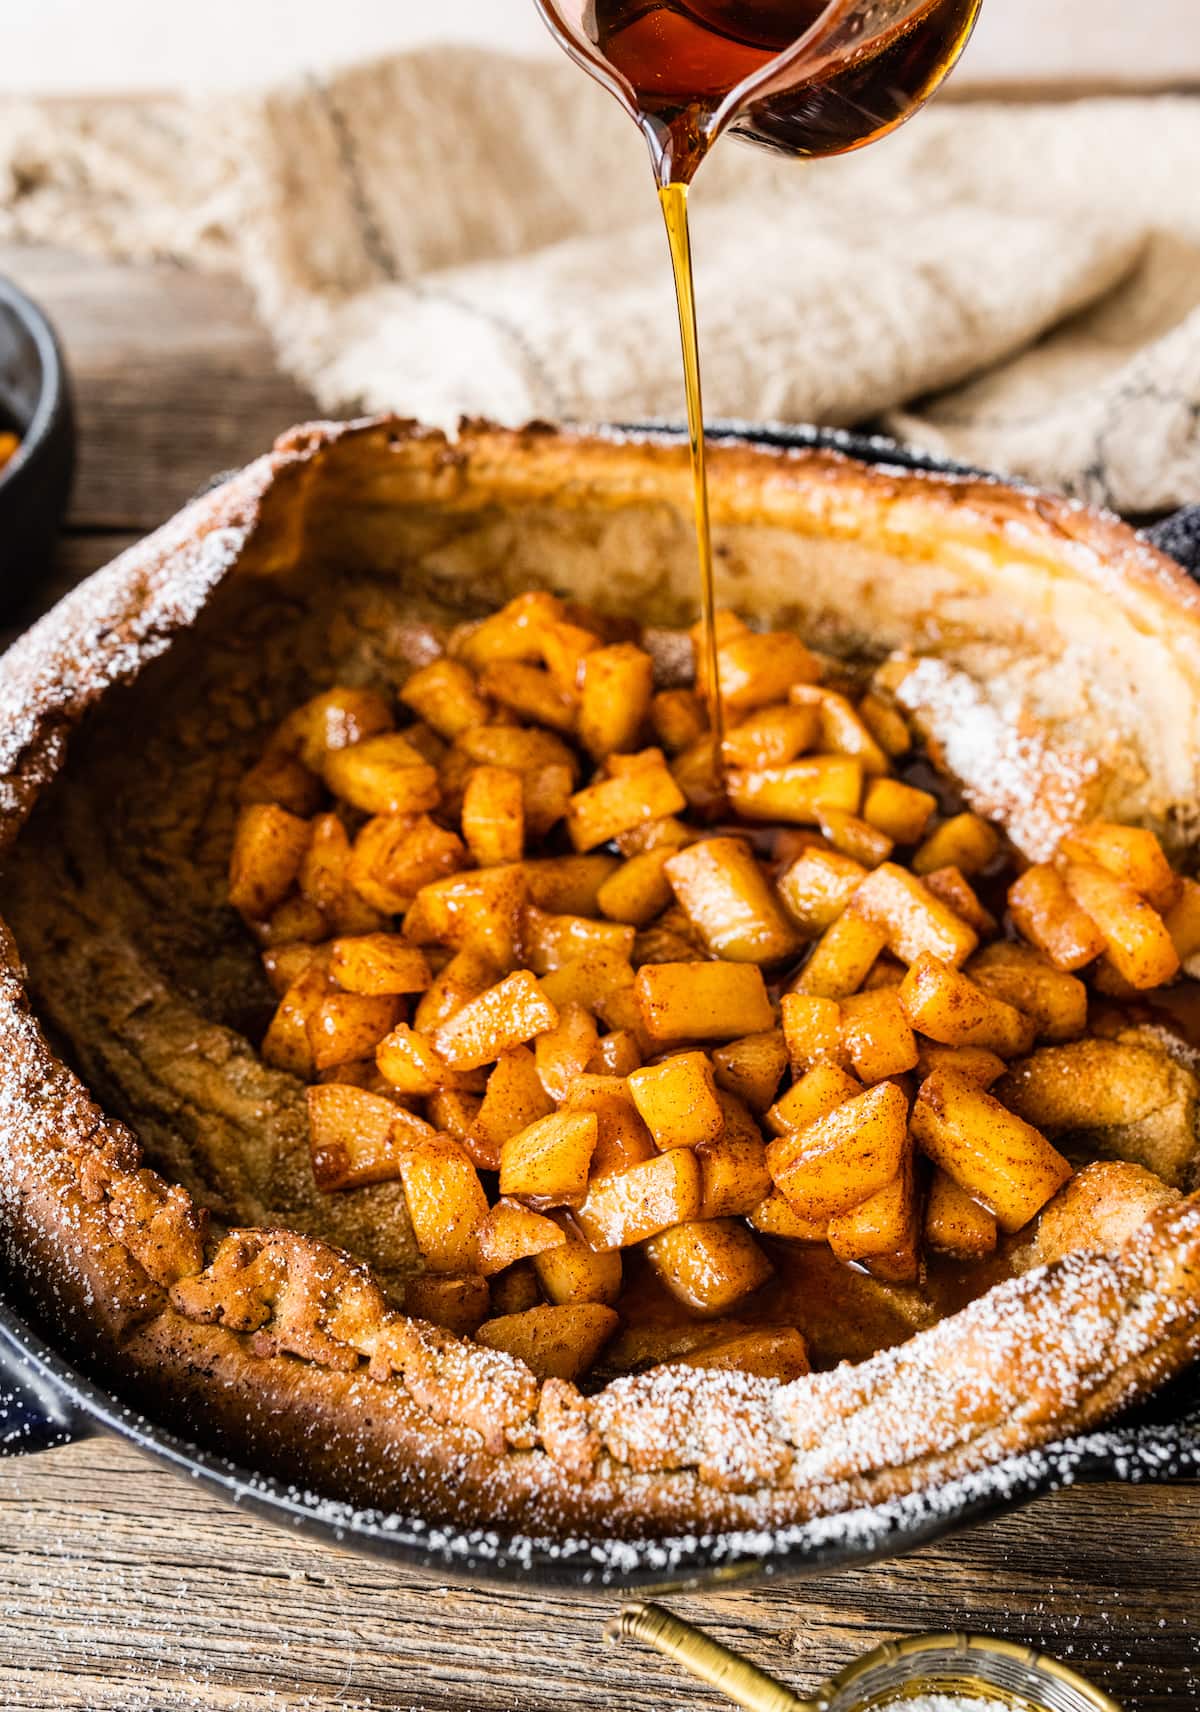 maple syrup being poured over brown butter Dutch baby with cinnamon apples in cast iron skillet. 